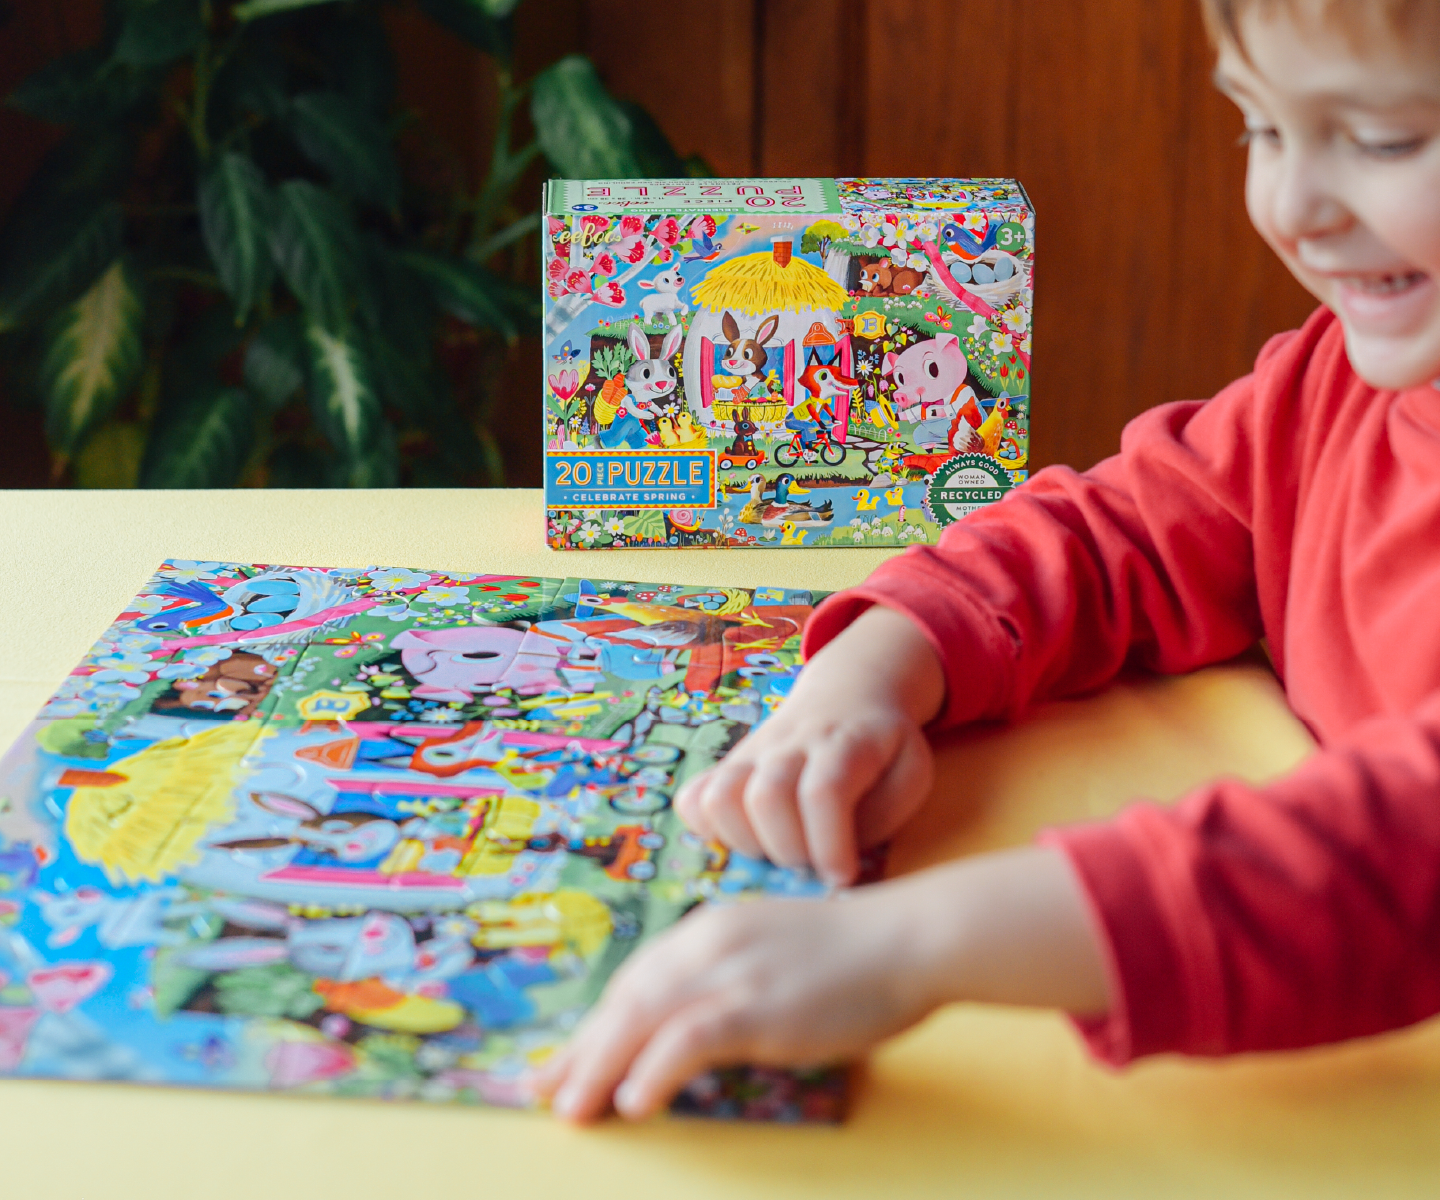 Child playing with Celebrate Spring 20 piece puzzle